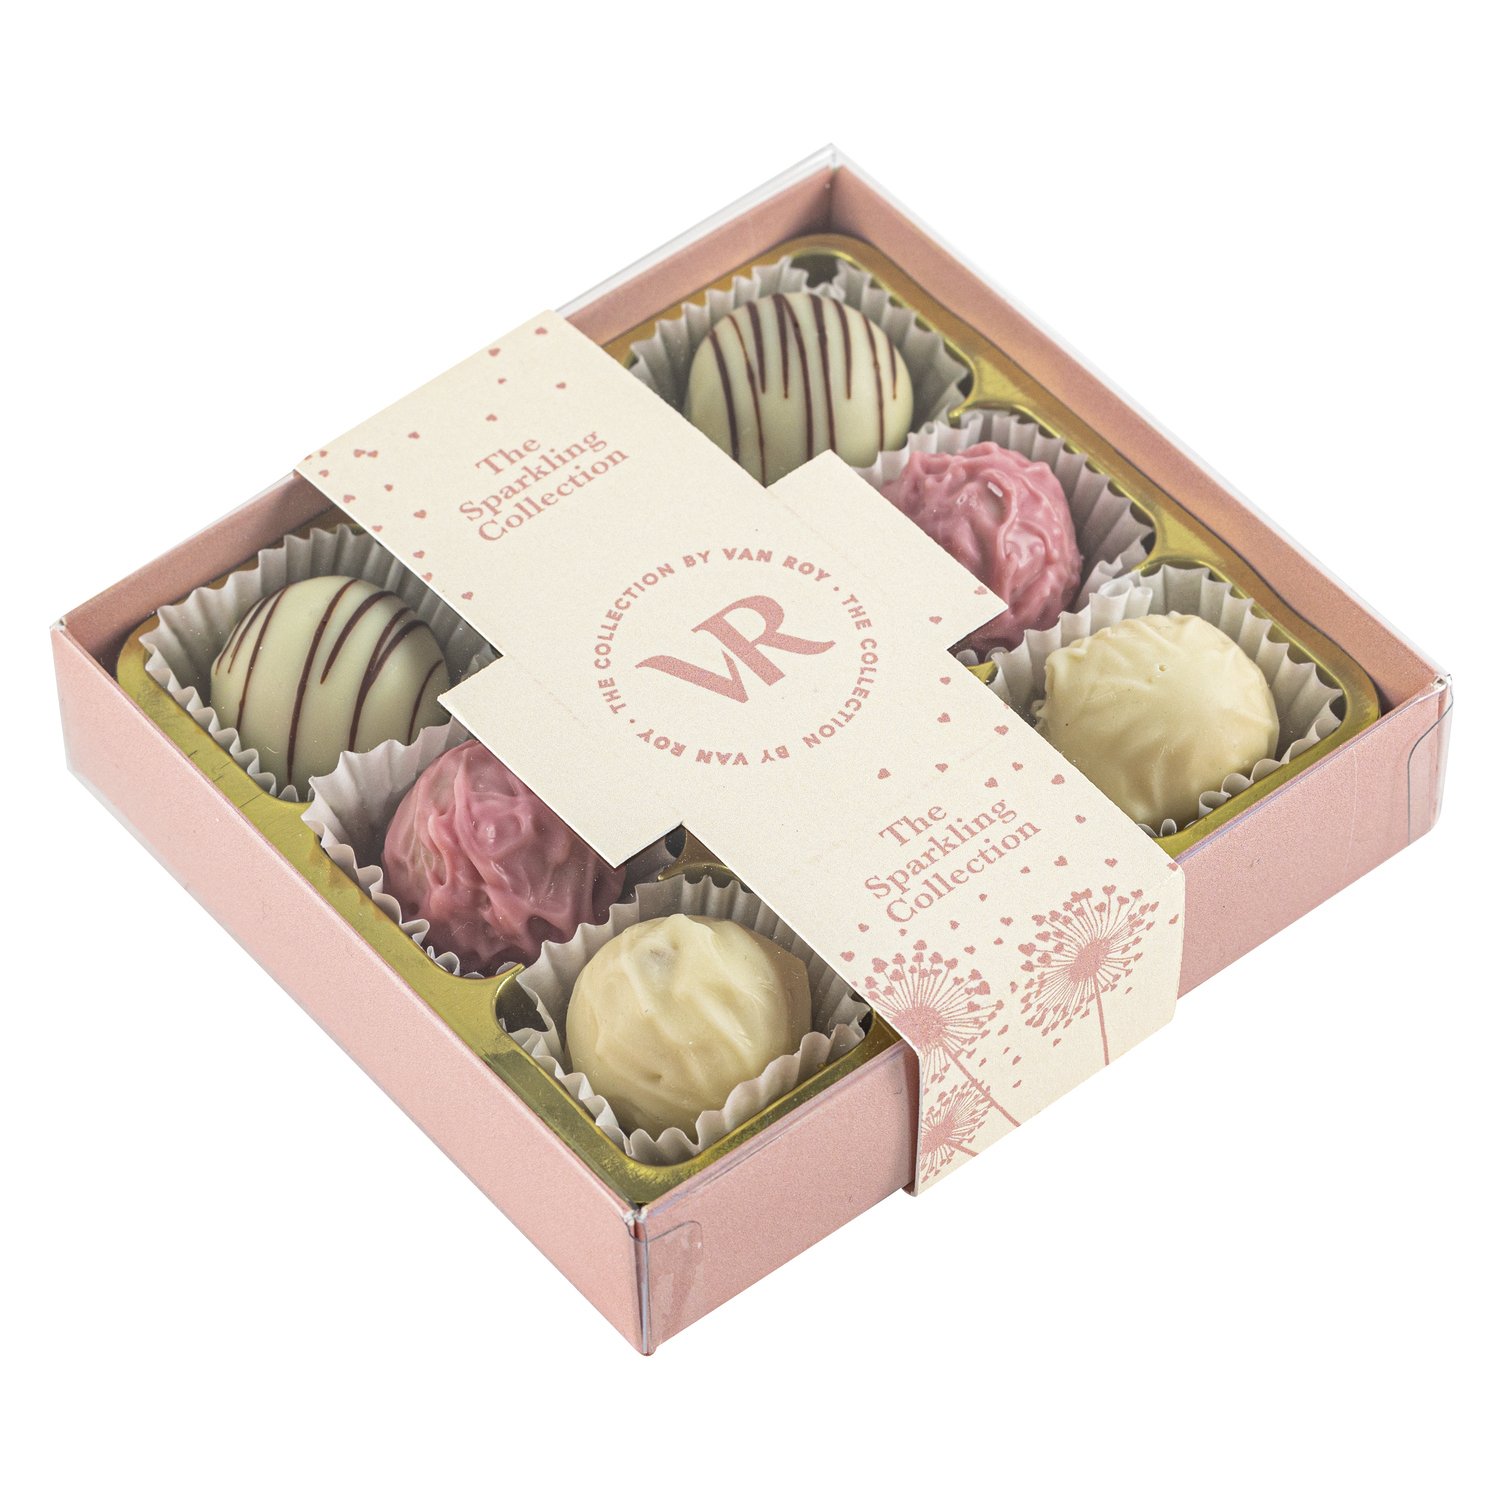 The Sparkling Collection of champagne truffles in 9pc pink gift box - 12x120g